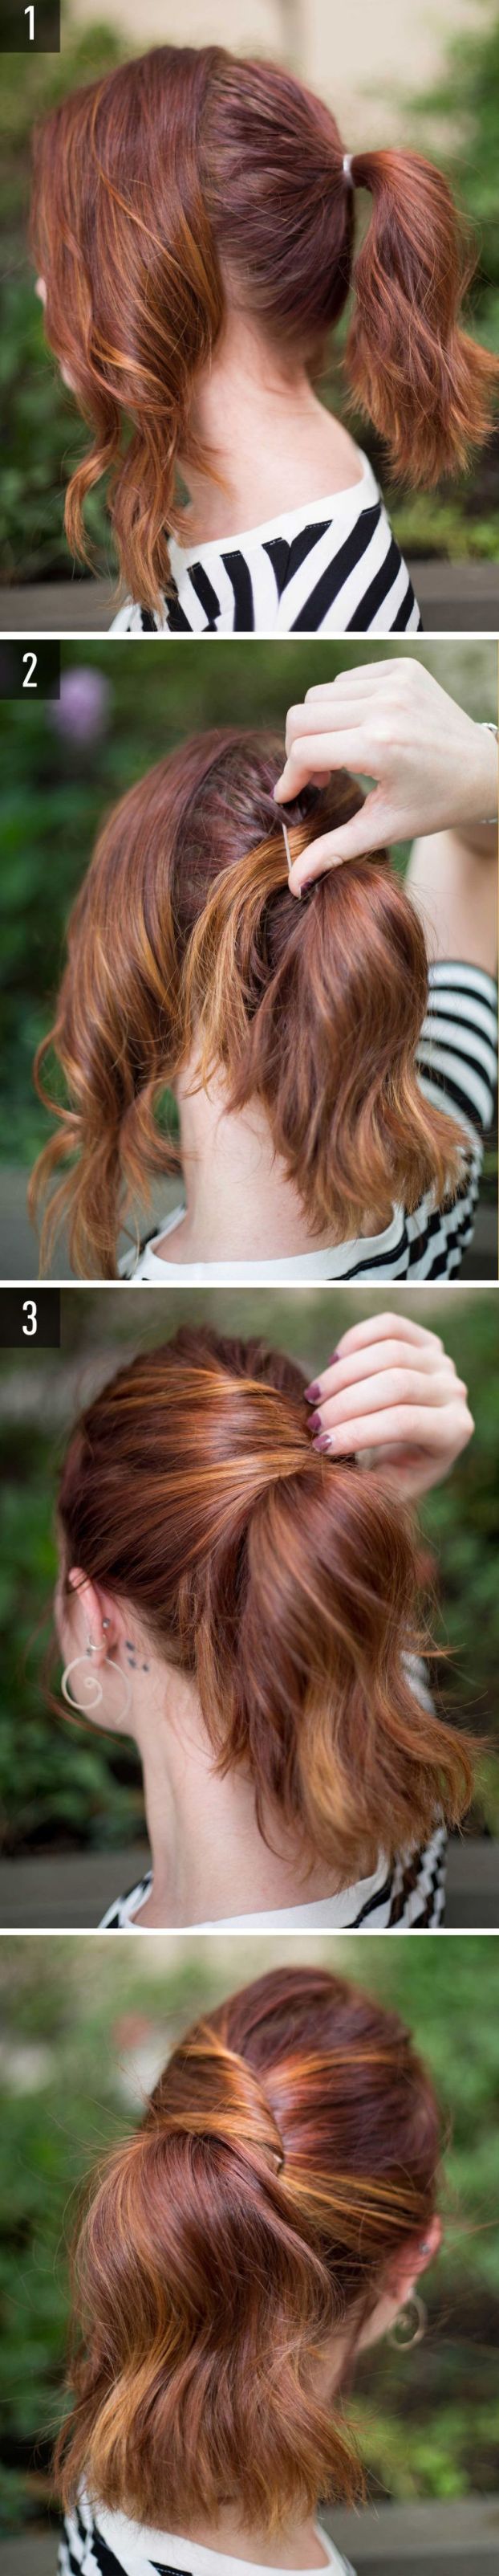 Easy-Ways-to-Style-Hair-3